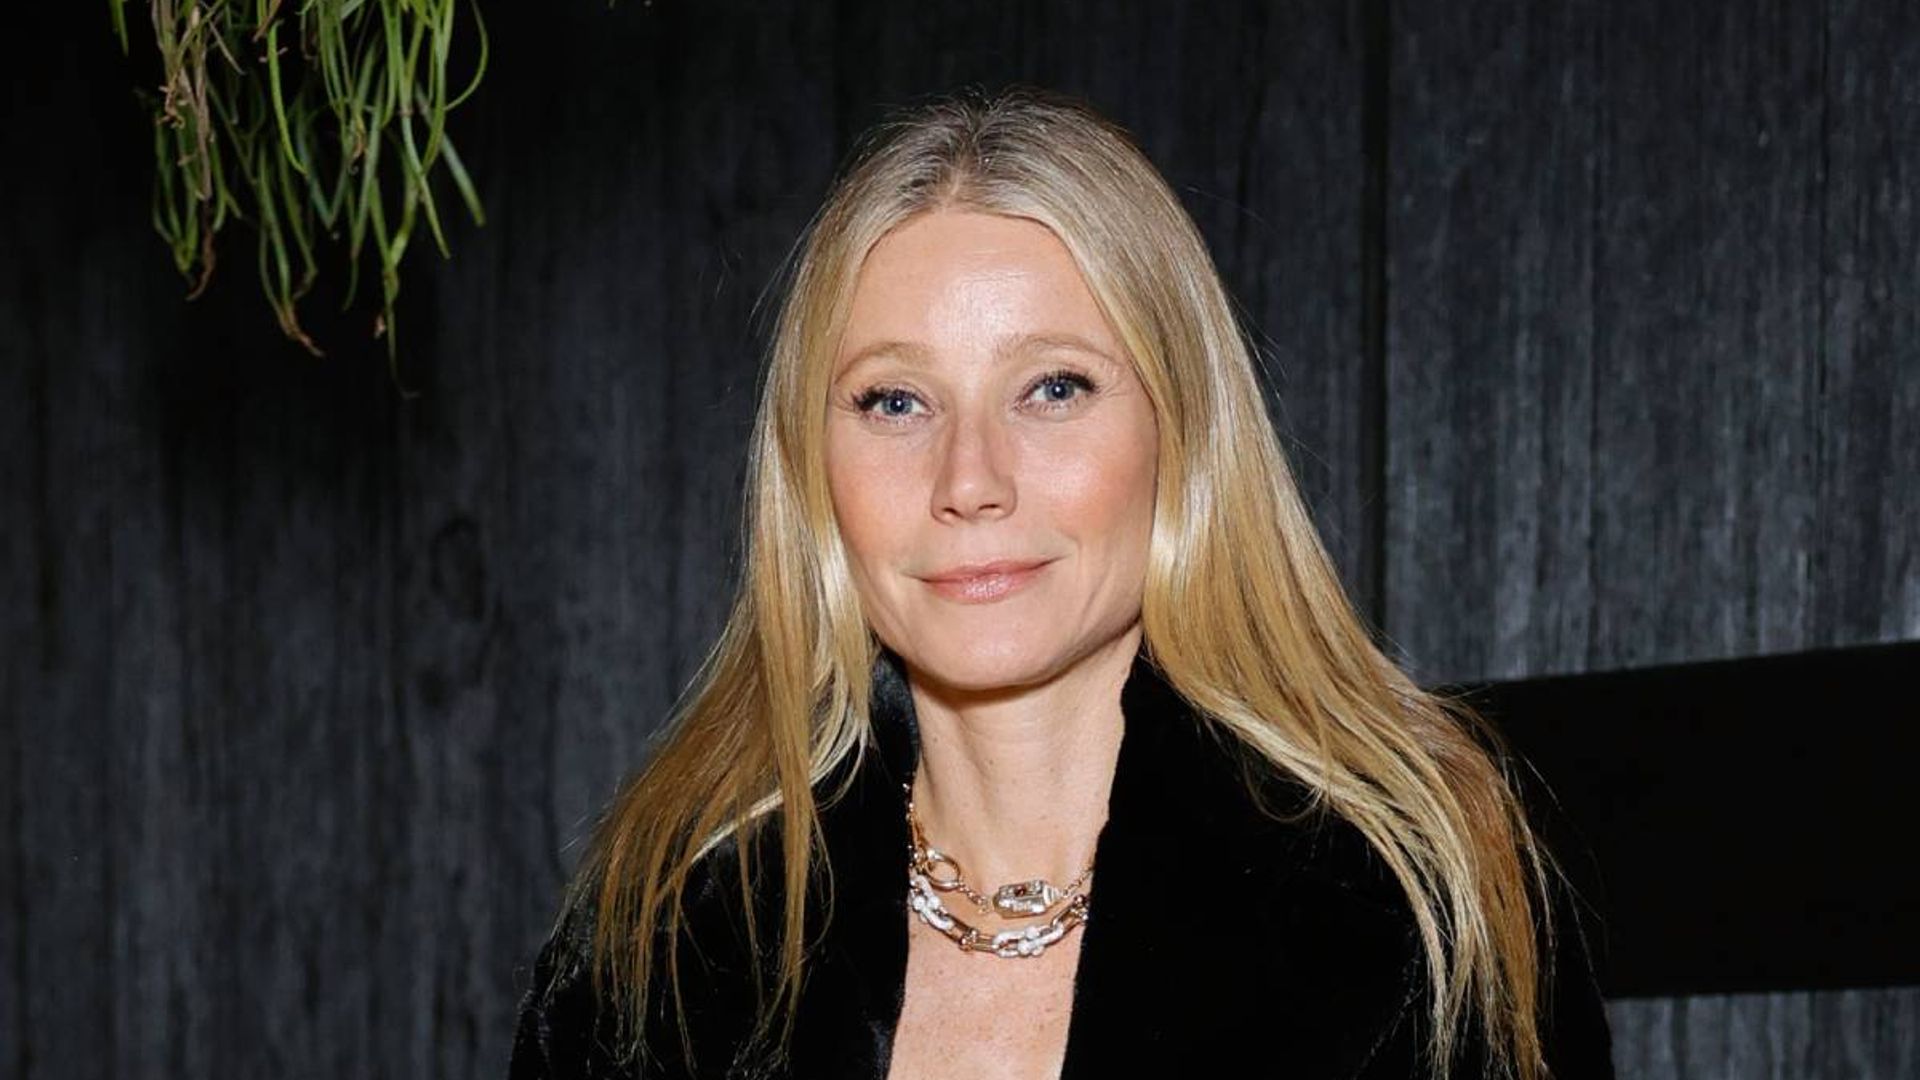 Gwyneth Paltrow leaves fans in awe of her physique as she poses in lingerie  in bathroom video | HELLO!